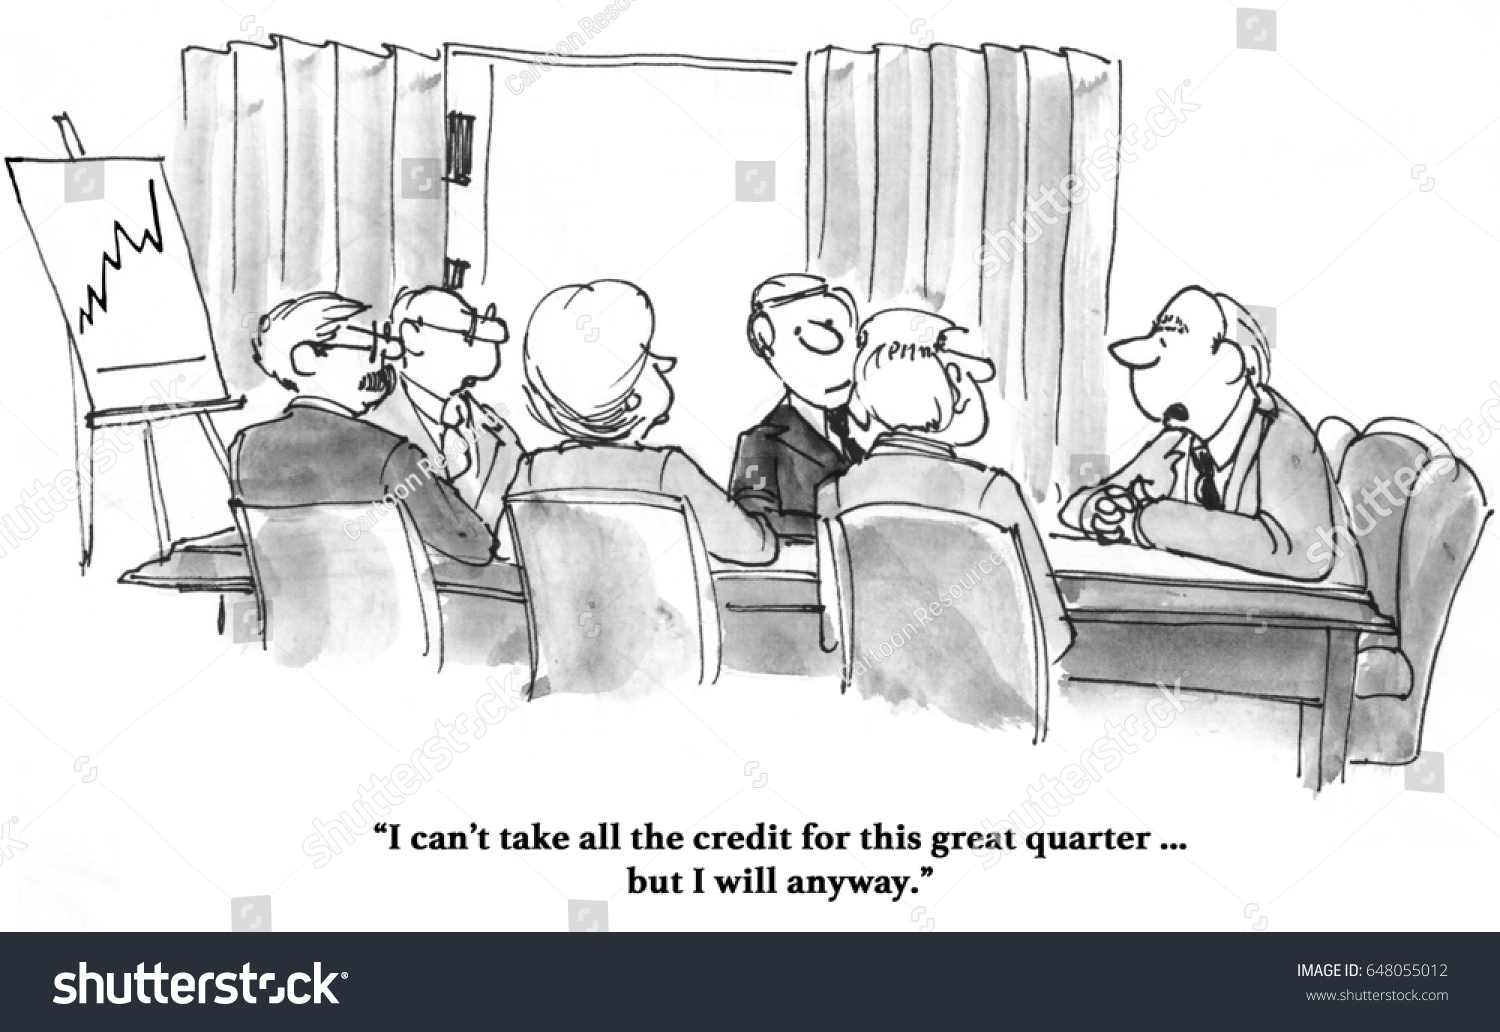 stock-photo-business-cartoon-about-sales-increasing-and-the-boss-taking-all-the-credit-for-it-648055012.jpg